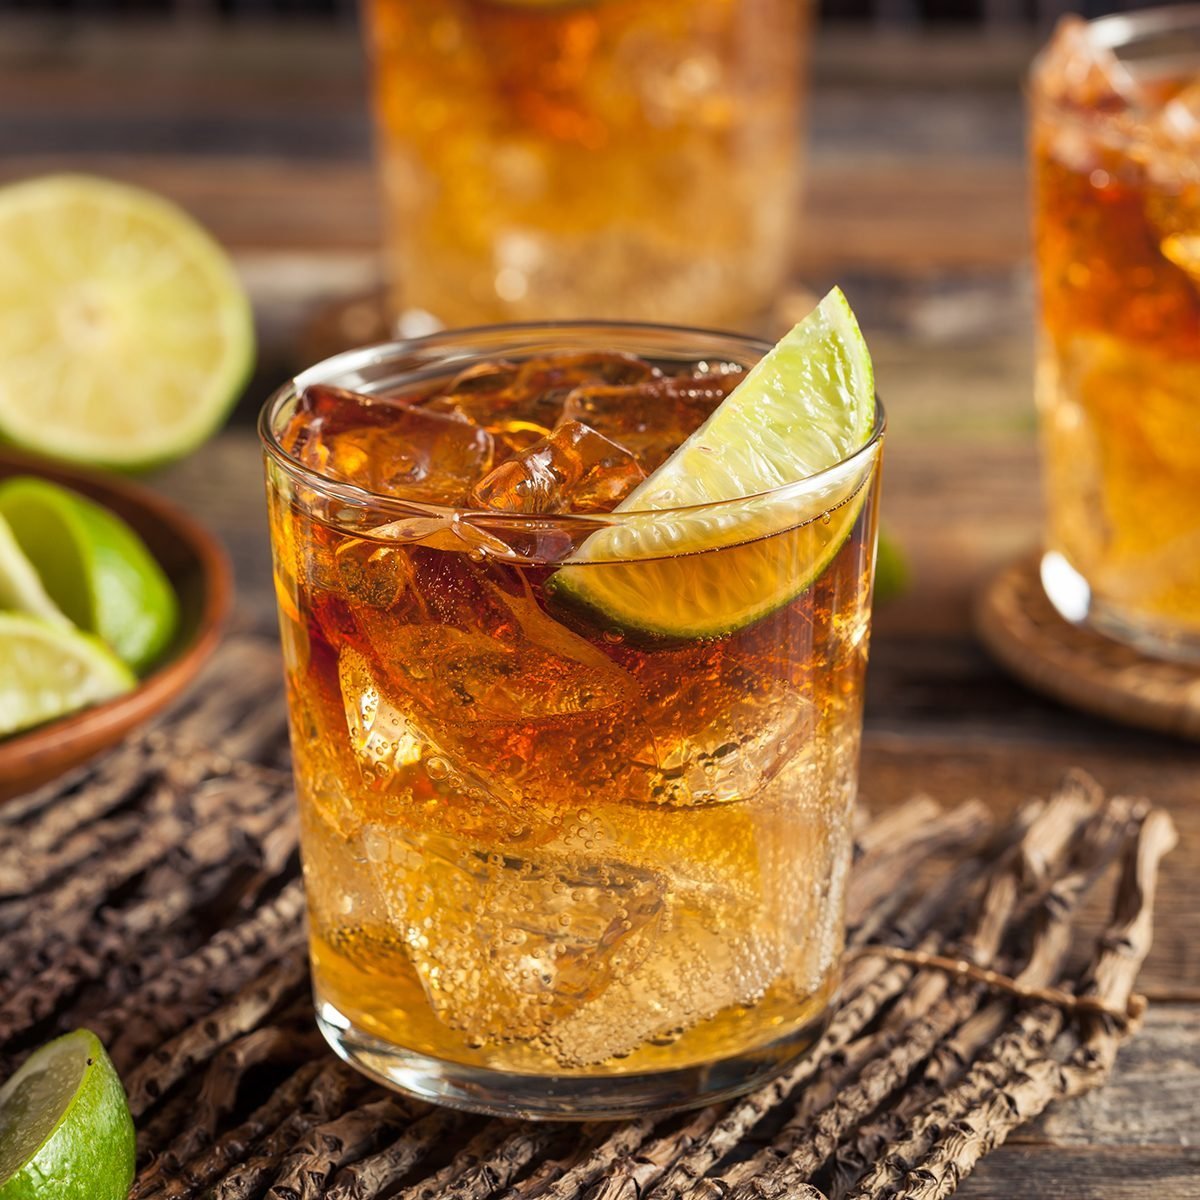 15 Classic Rum Drinks That You Should Know